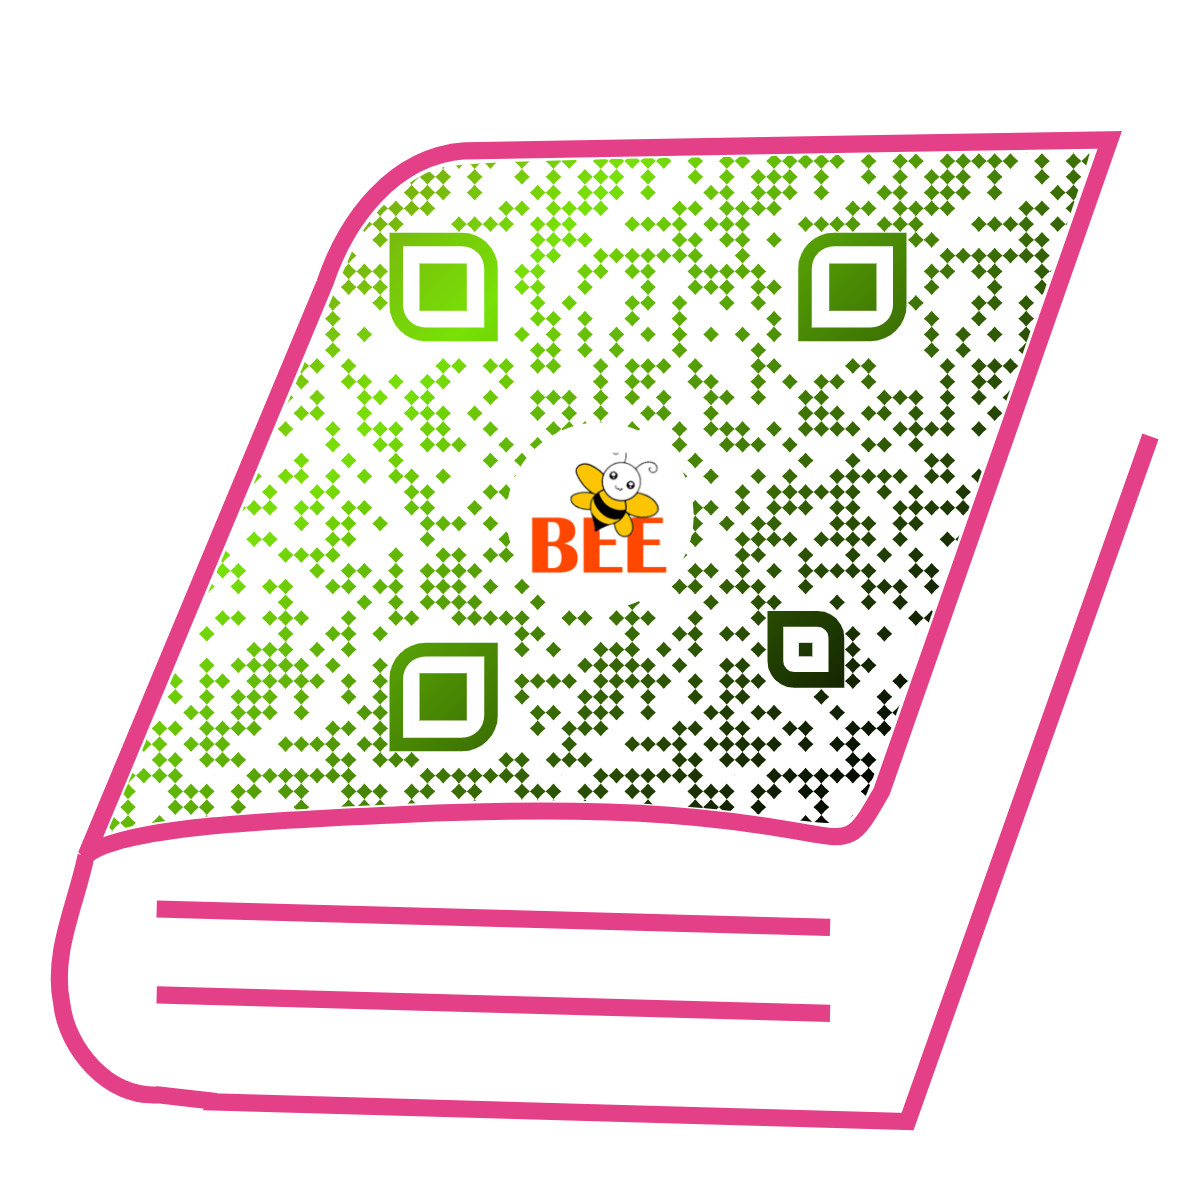 How to scan a QR Code from a picture in the gallery